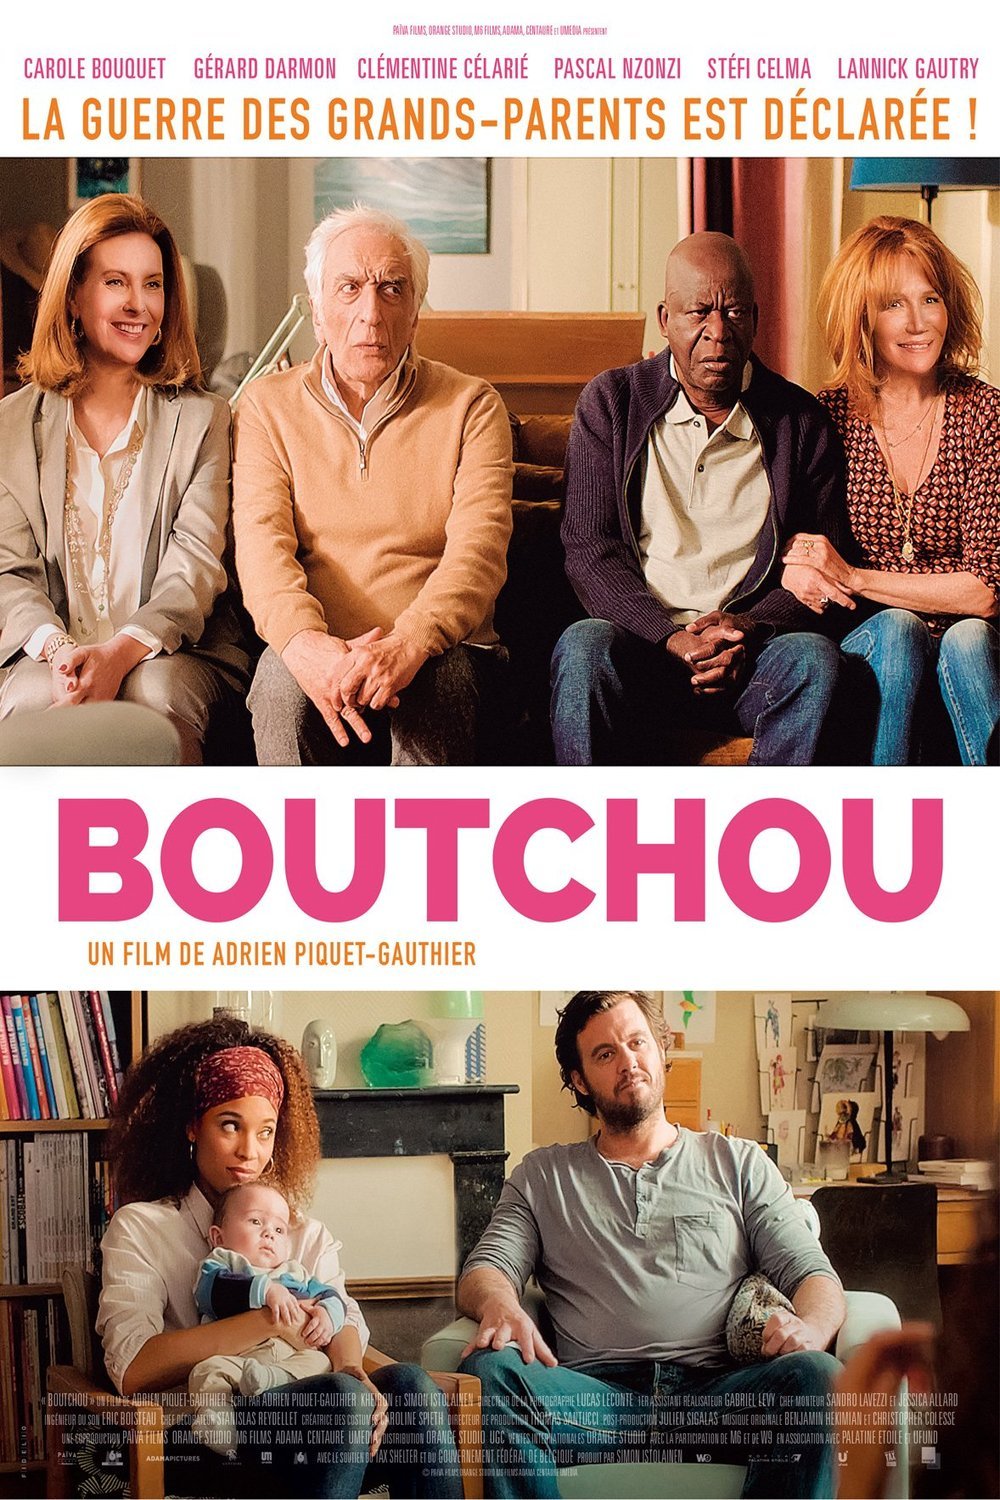 Poster of the movie Boutchou